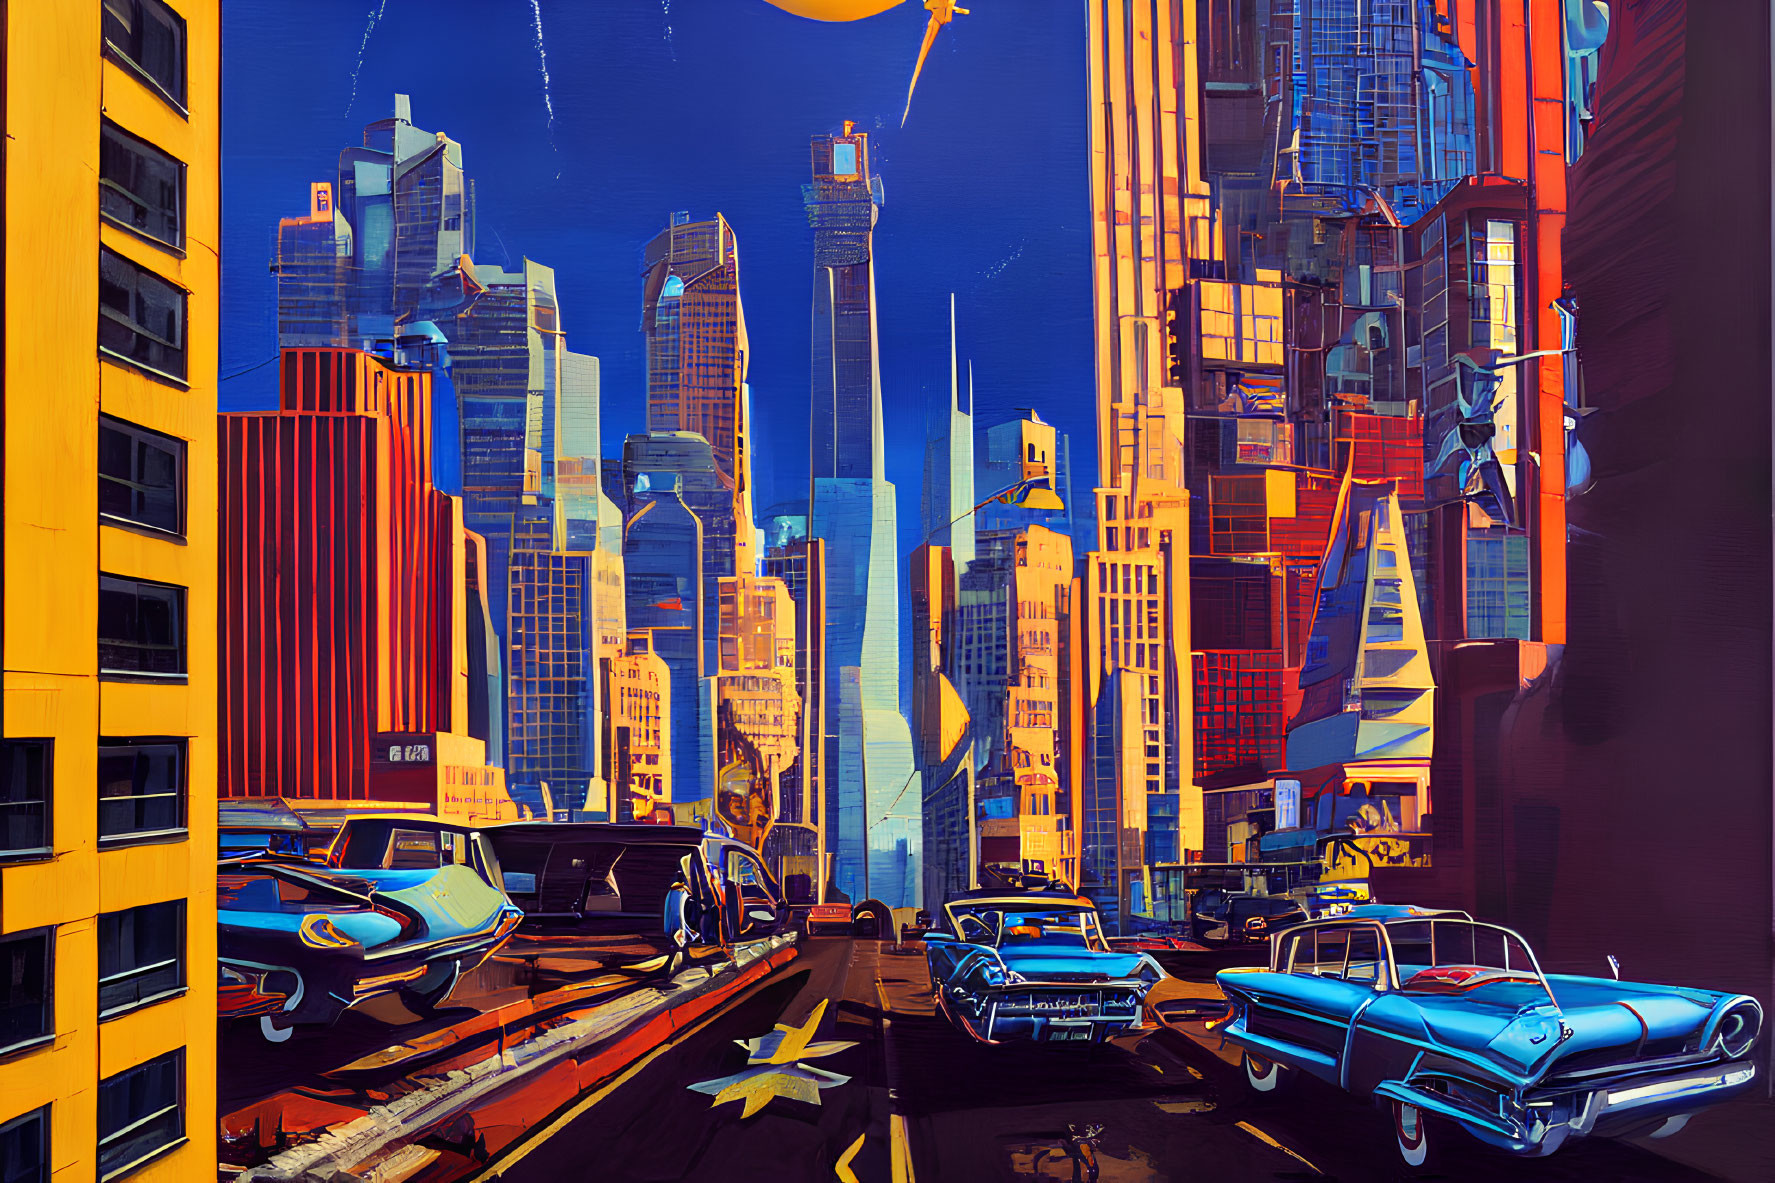 Colorful futuristic cityscape with flying cars and retro vehicles under a bright sky